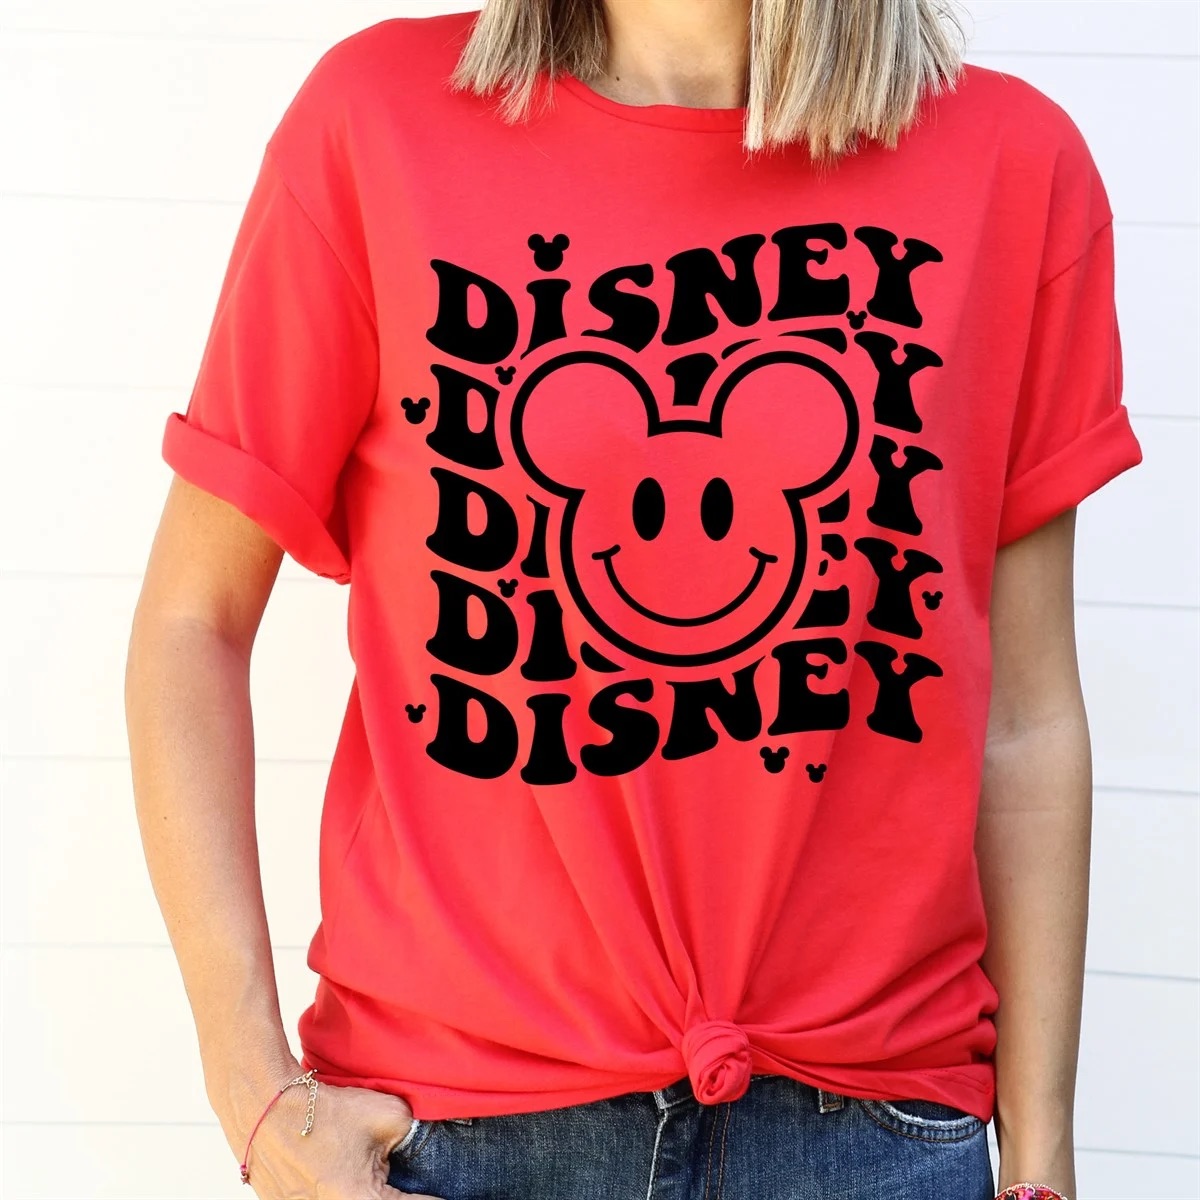 Disney With Smiley Face Stacked Vinyl Tee